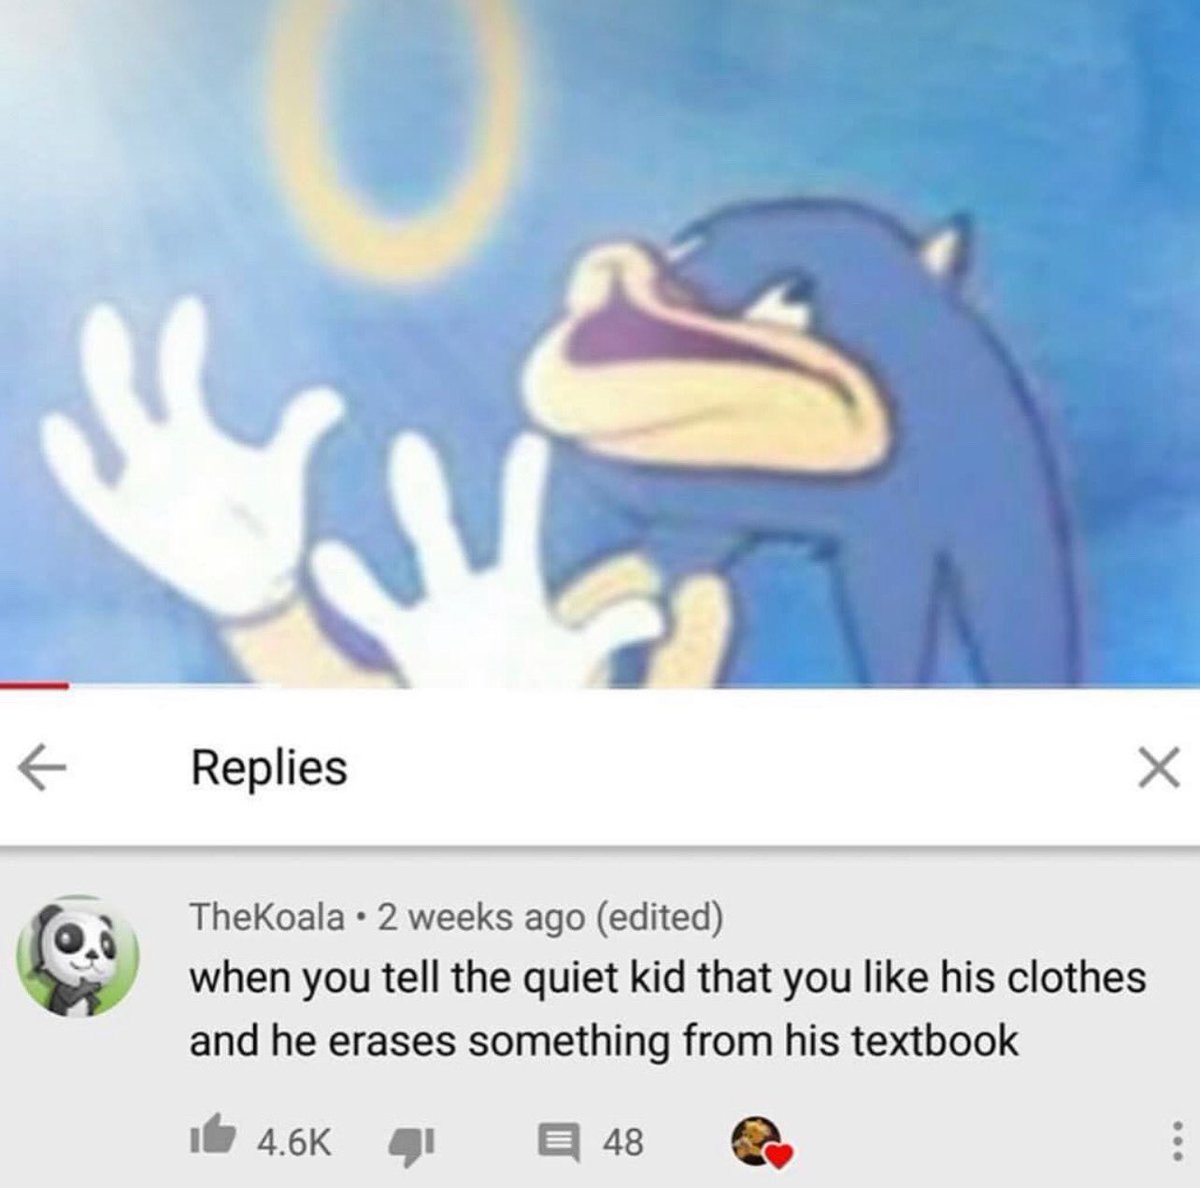 funny and savage youtube comments - sonic onion ring meme - Replies X TheKoala 2 weeks ago edited when you tell the quiet kid that you his clothes and he erases something from his textbook 41 48 ...